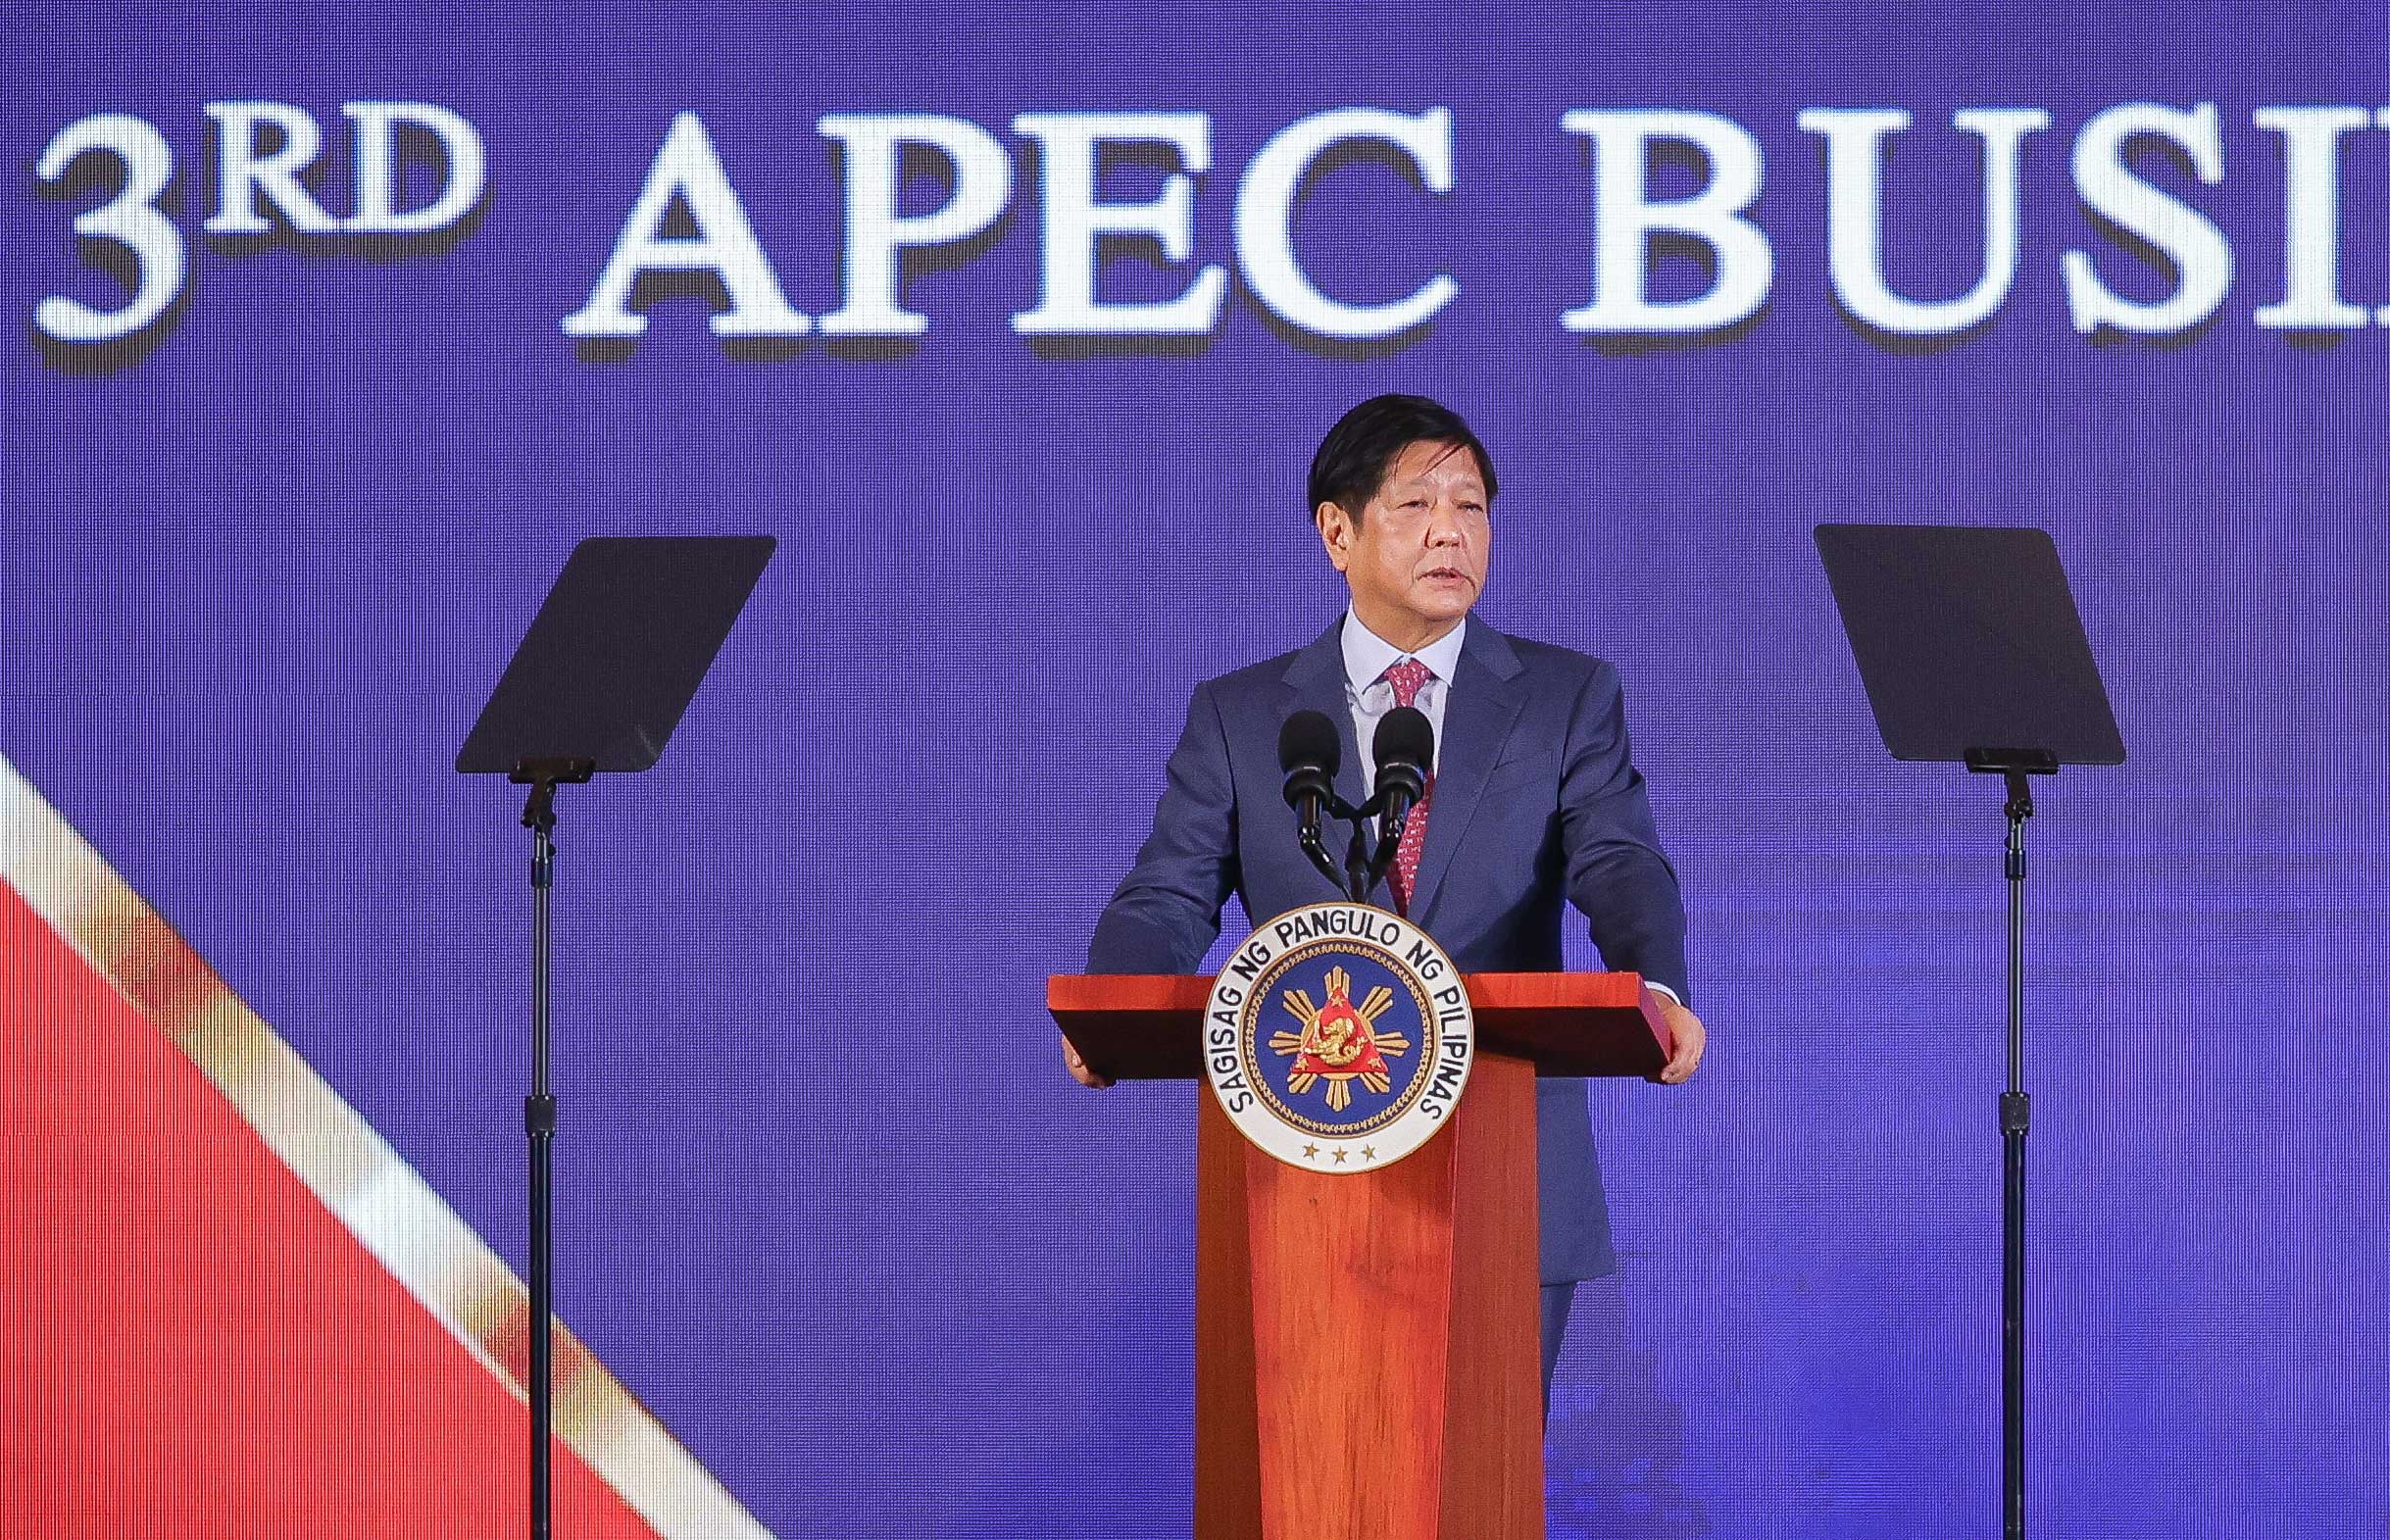 PRESIDENT MARCOS told delegates to the Asia-Pacific Economic Cooperation (APEC) Business Advisory Council (ABAC) III meeting in Cebu that the “government and business sector must come together to identify practical, pragmatic, and promising solutions to sustainably address pressing issues like energy insecurity, the triple threat of climate change, pollution, and biodiversity loss.”